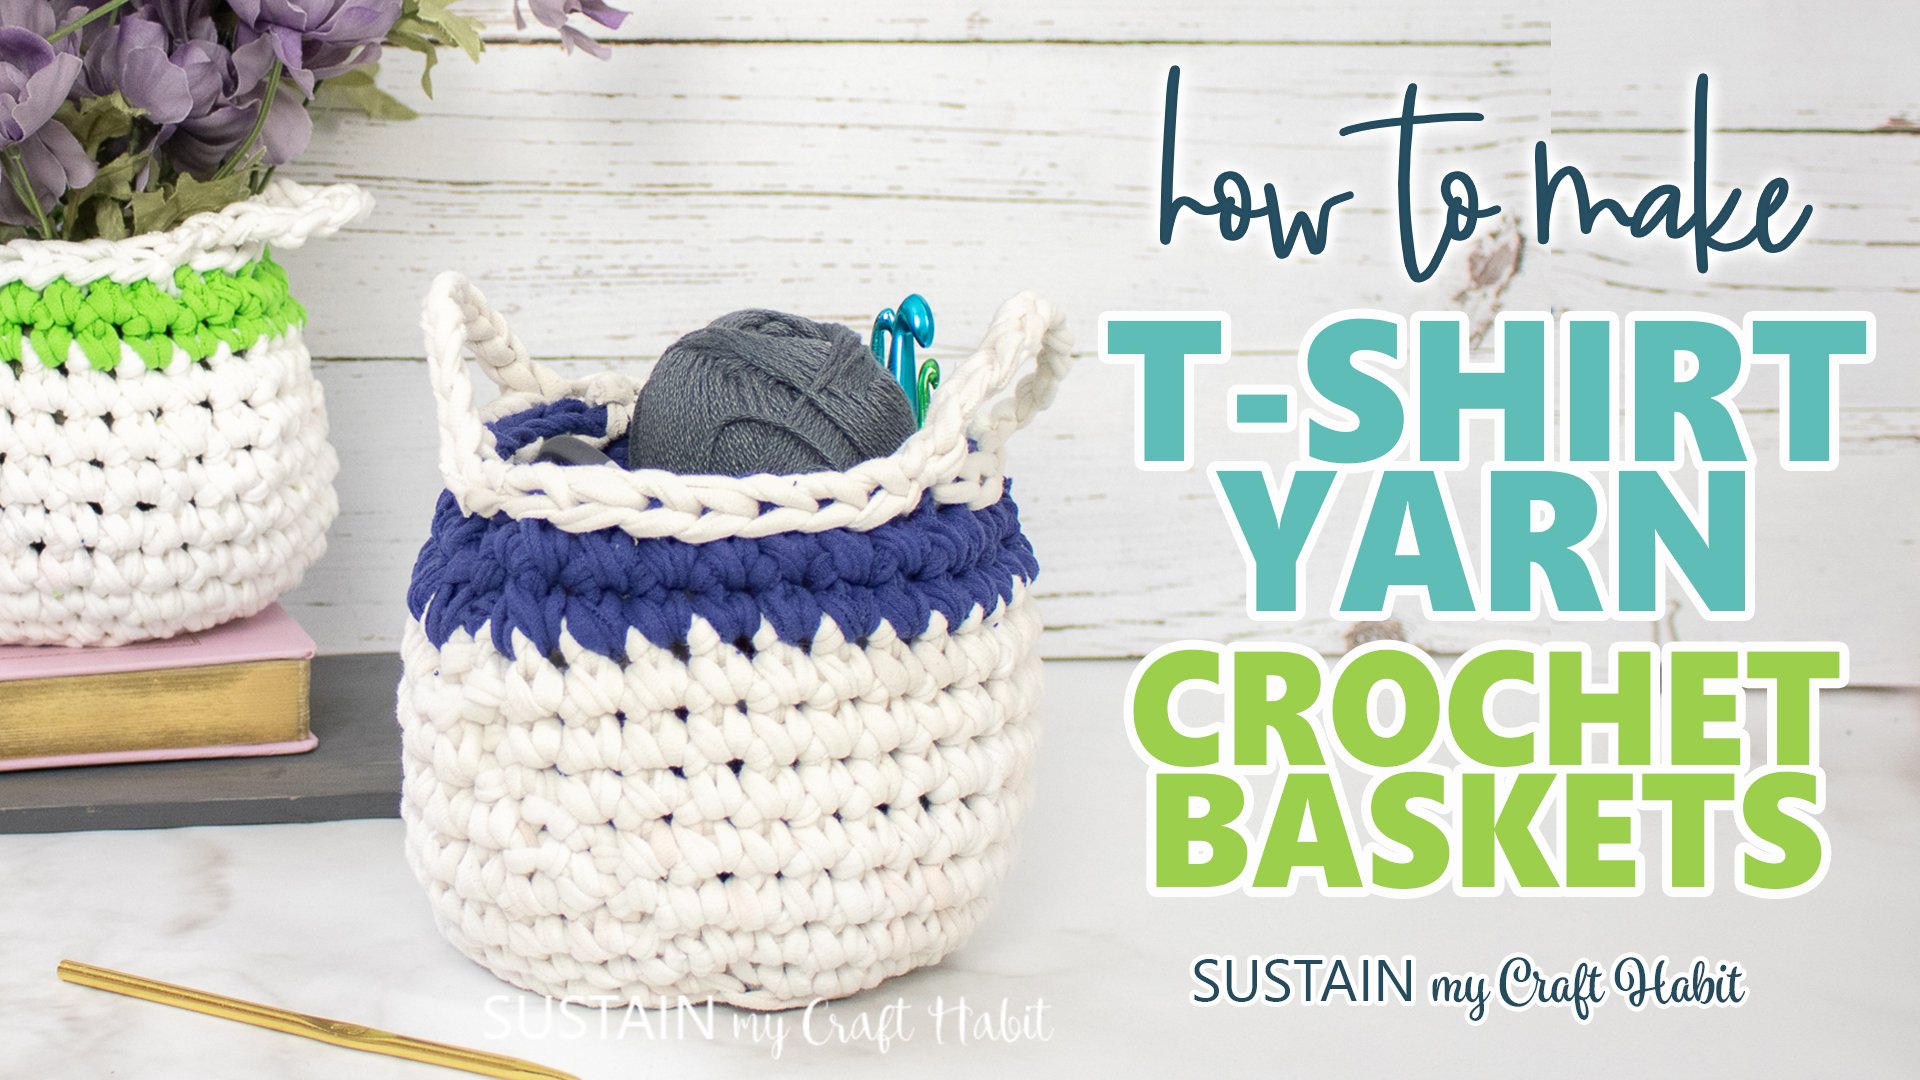 How to crochet a basket with T-shirt yarn - pine cone pattern